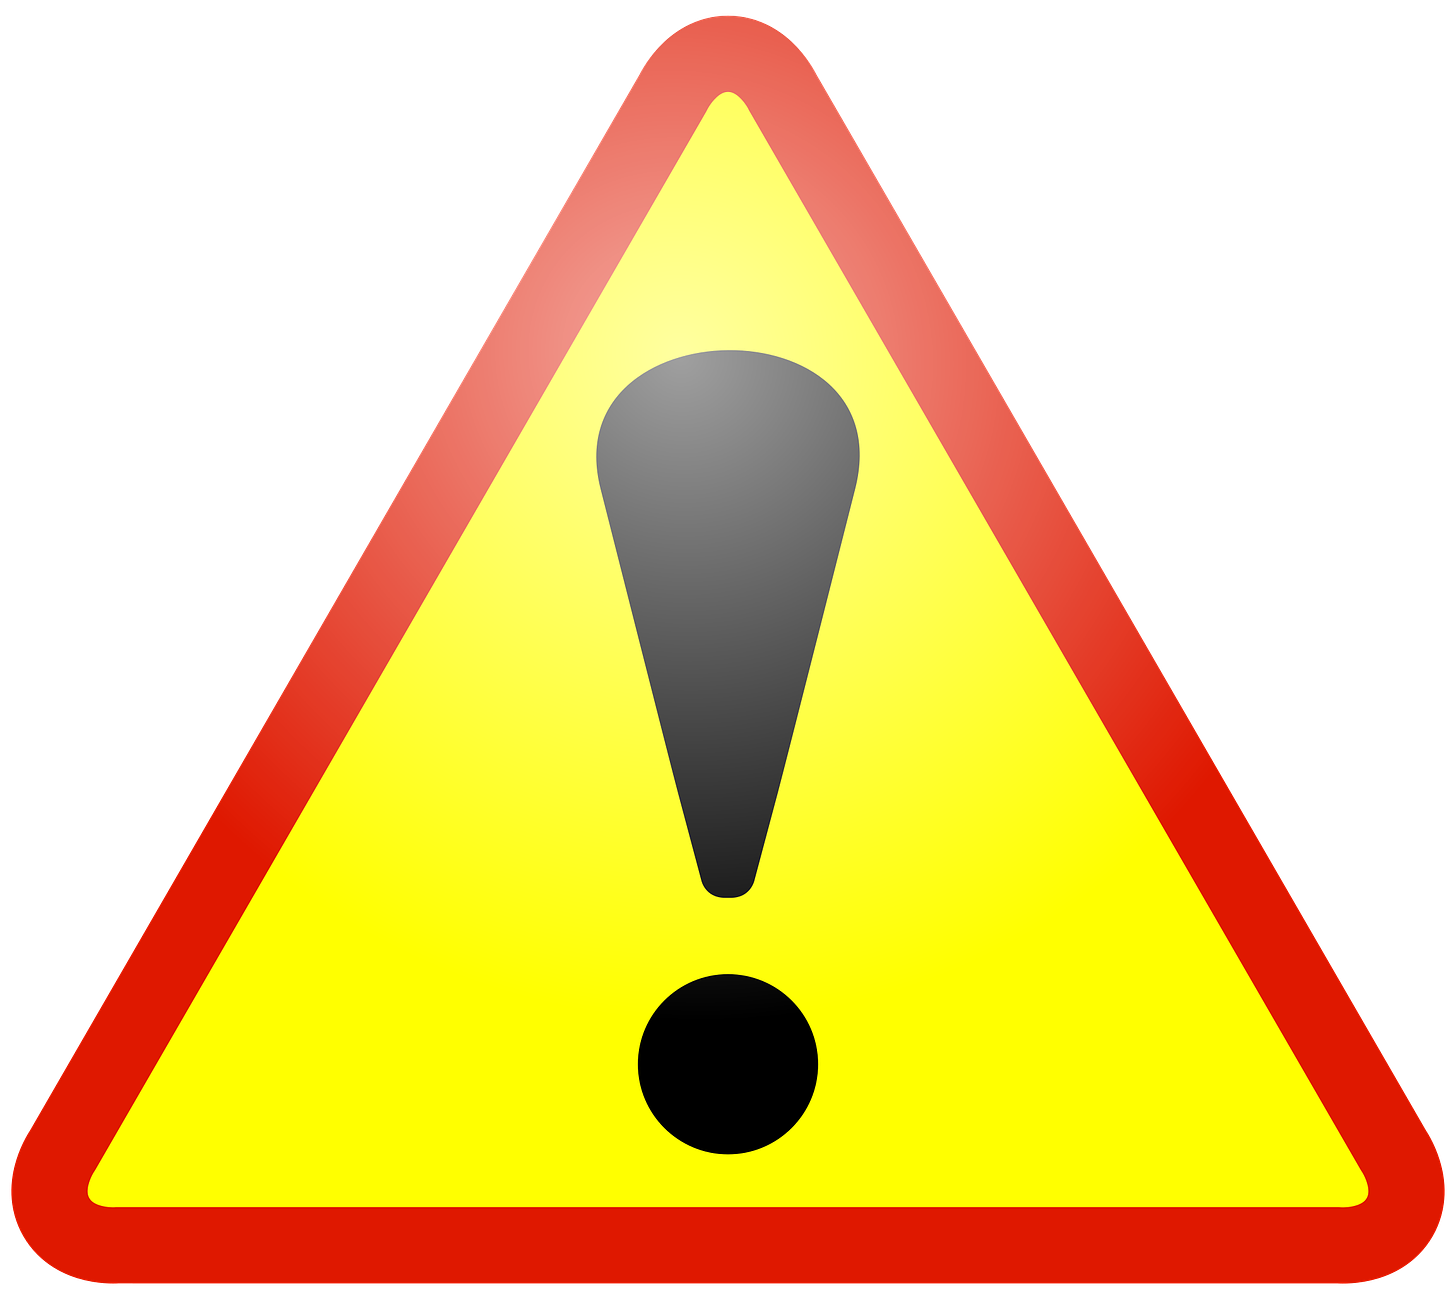 https://upload.wikimedia.org/wikipedia/commons/thumb/2/24/Warning_icon.svg/2306px-Warning_icon.svg.png